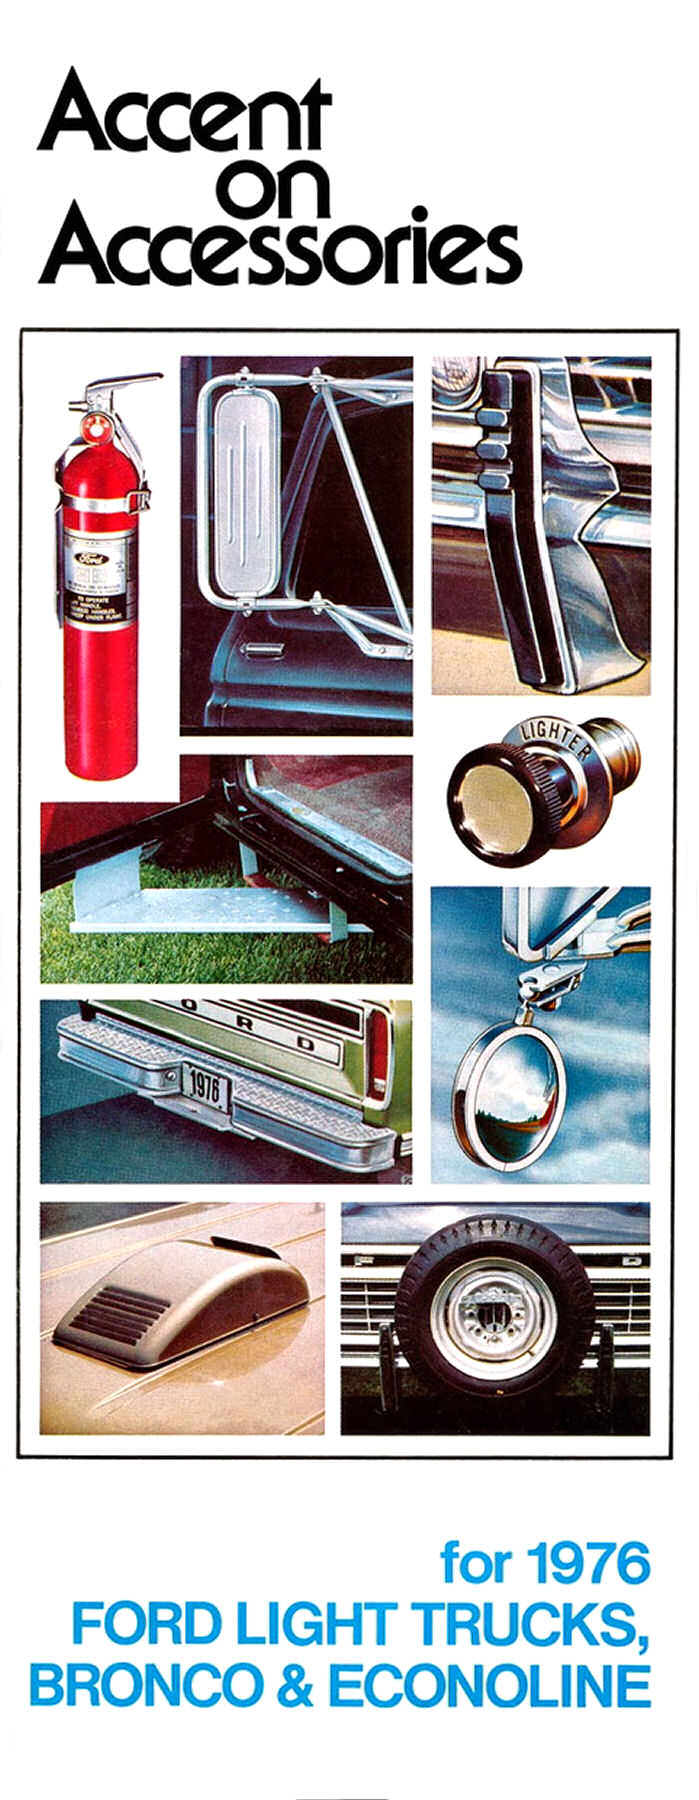 1976 Ford Light Truck Accessories-01